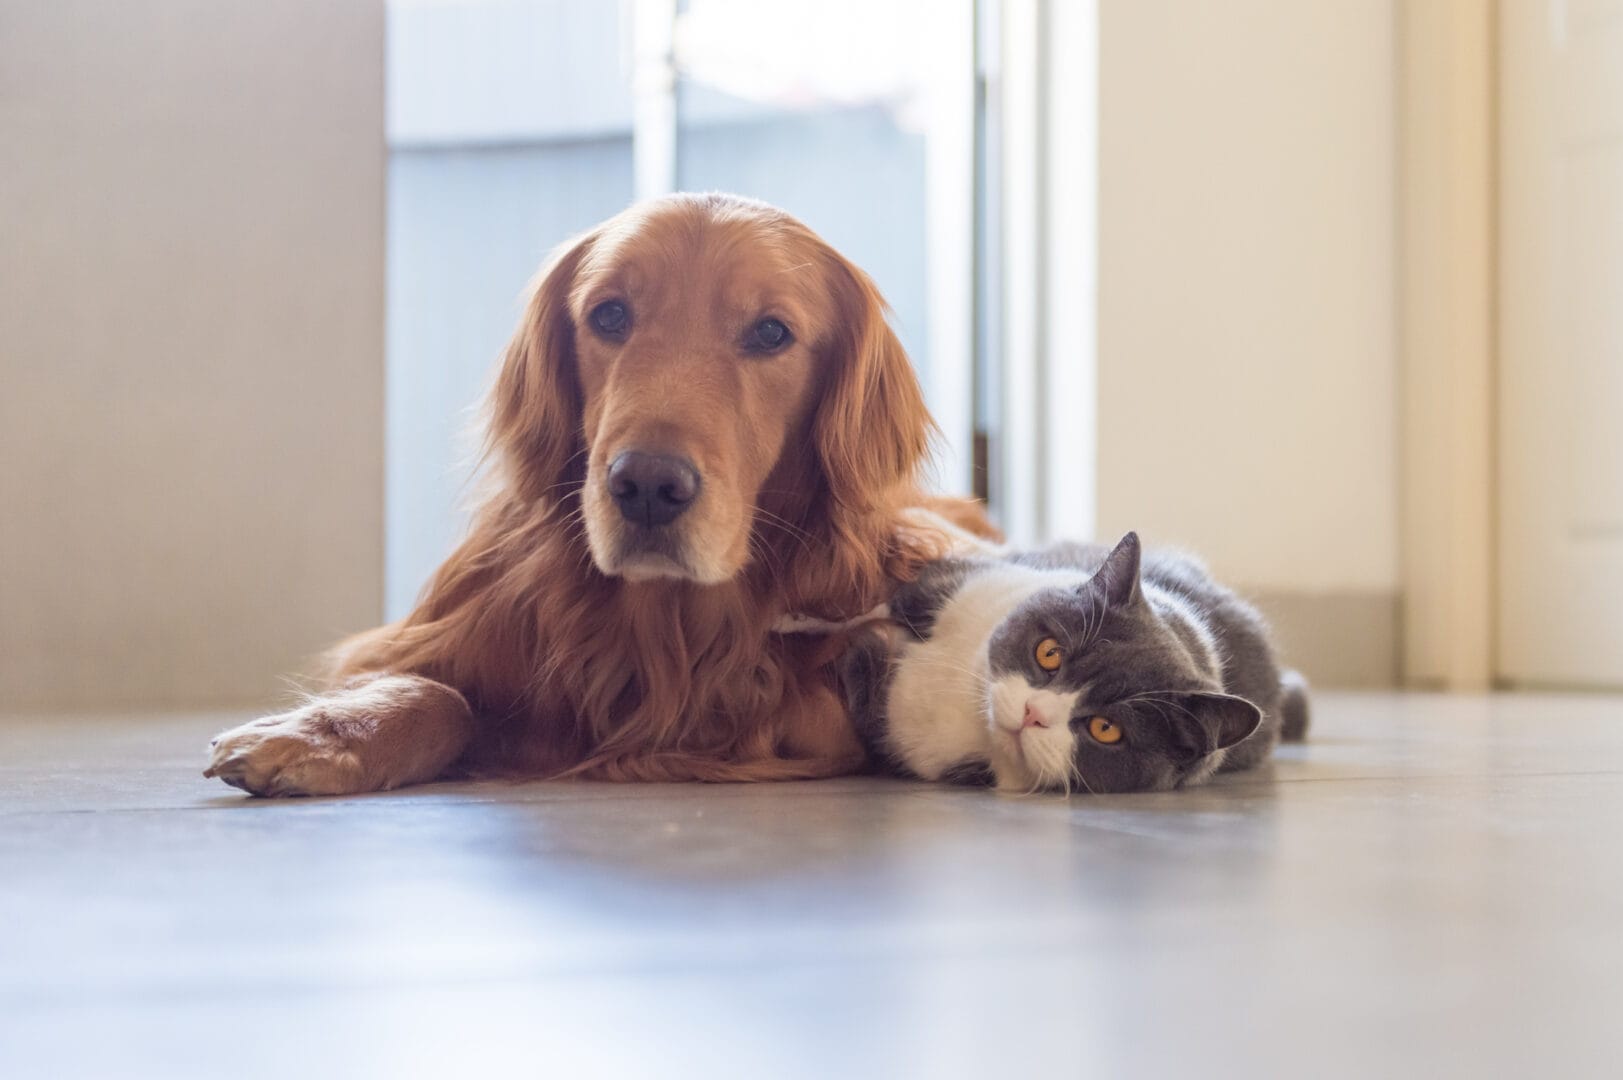 Pet Sitting Cost How Much Should I Pay A Pet Sitter - Carecom Resources